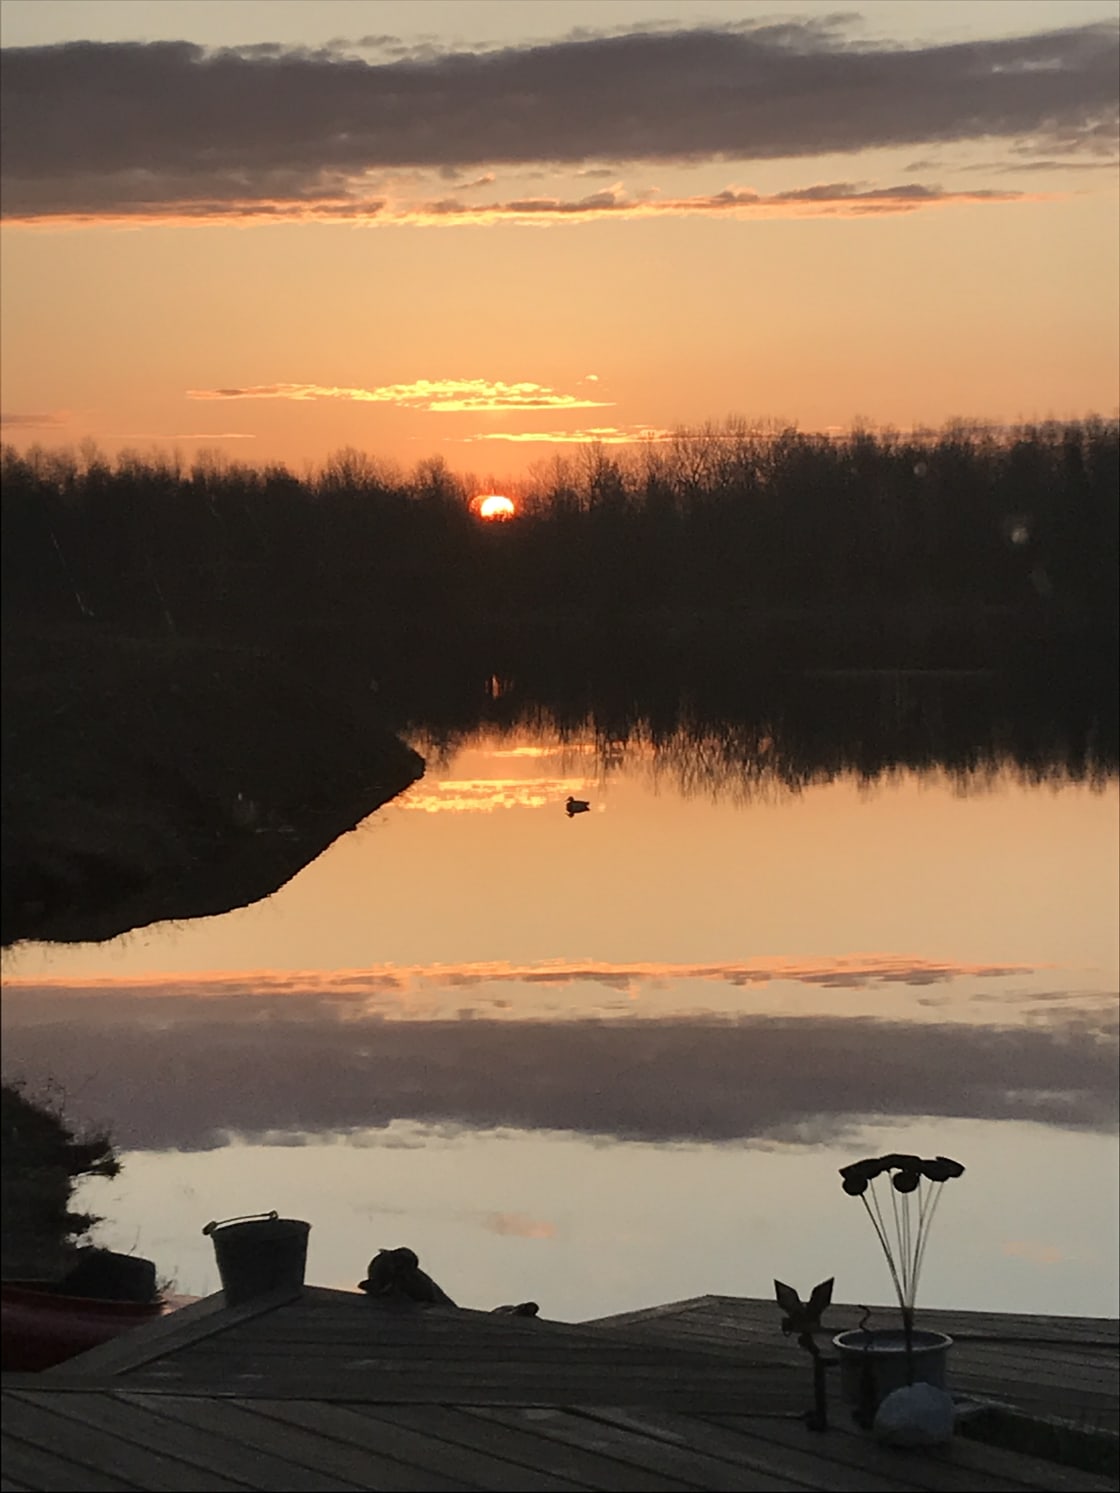 This sunrise view is looking across at the lake at the secluded forest where your RV can be parked. The rising sun marks your spot.